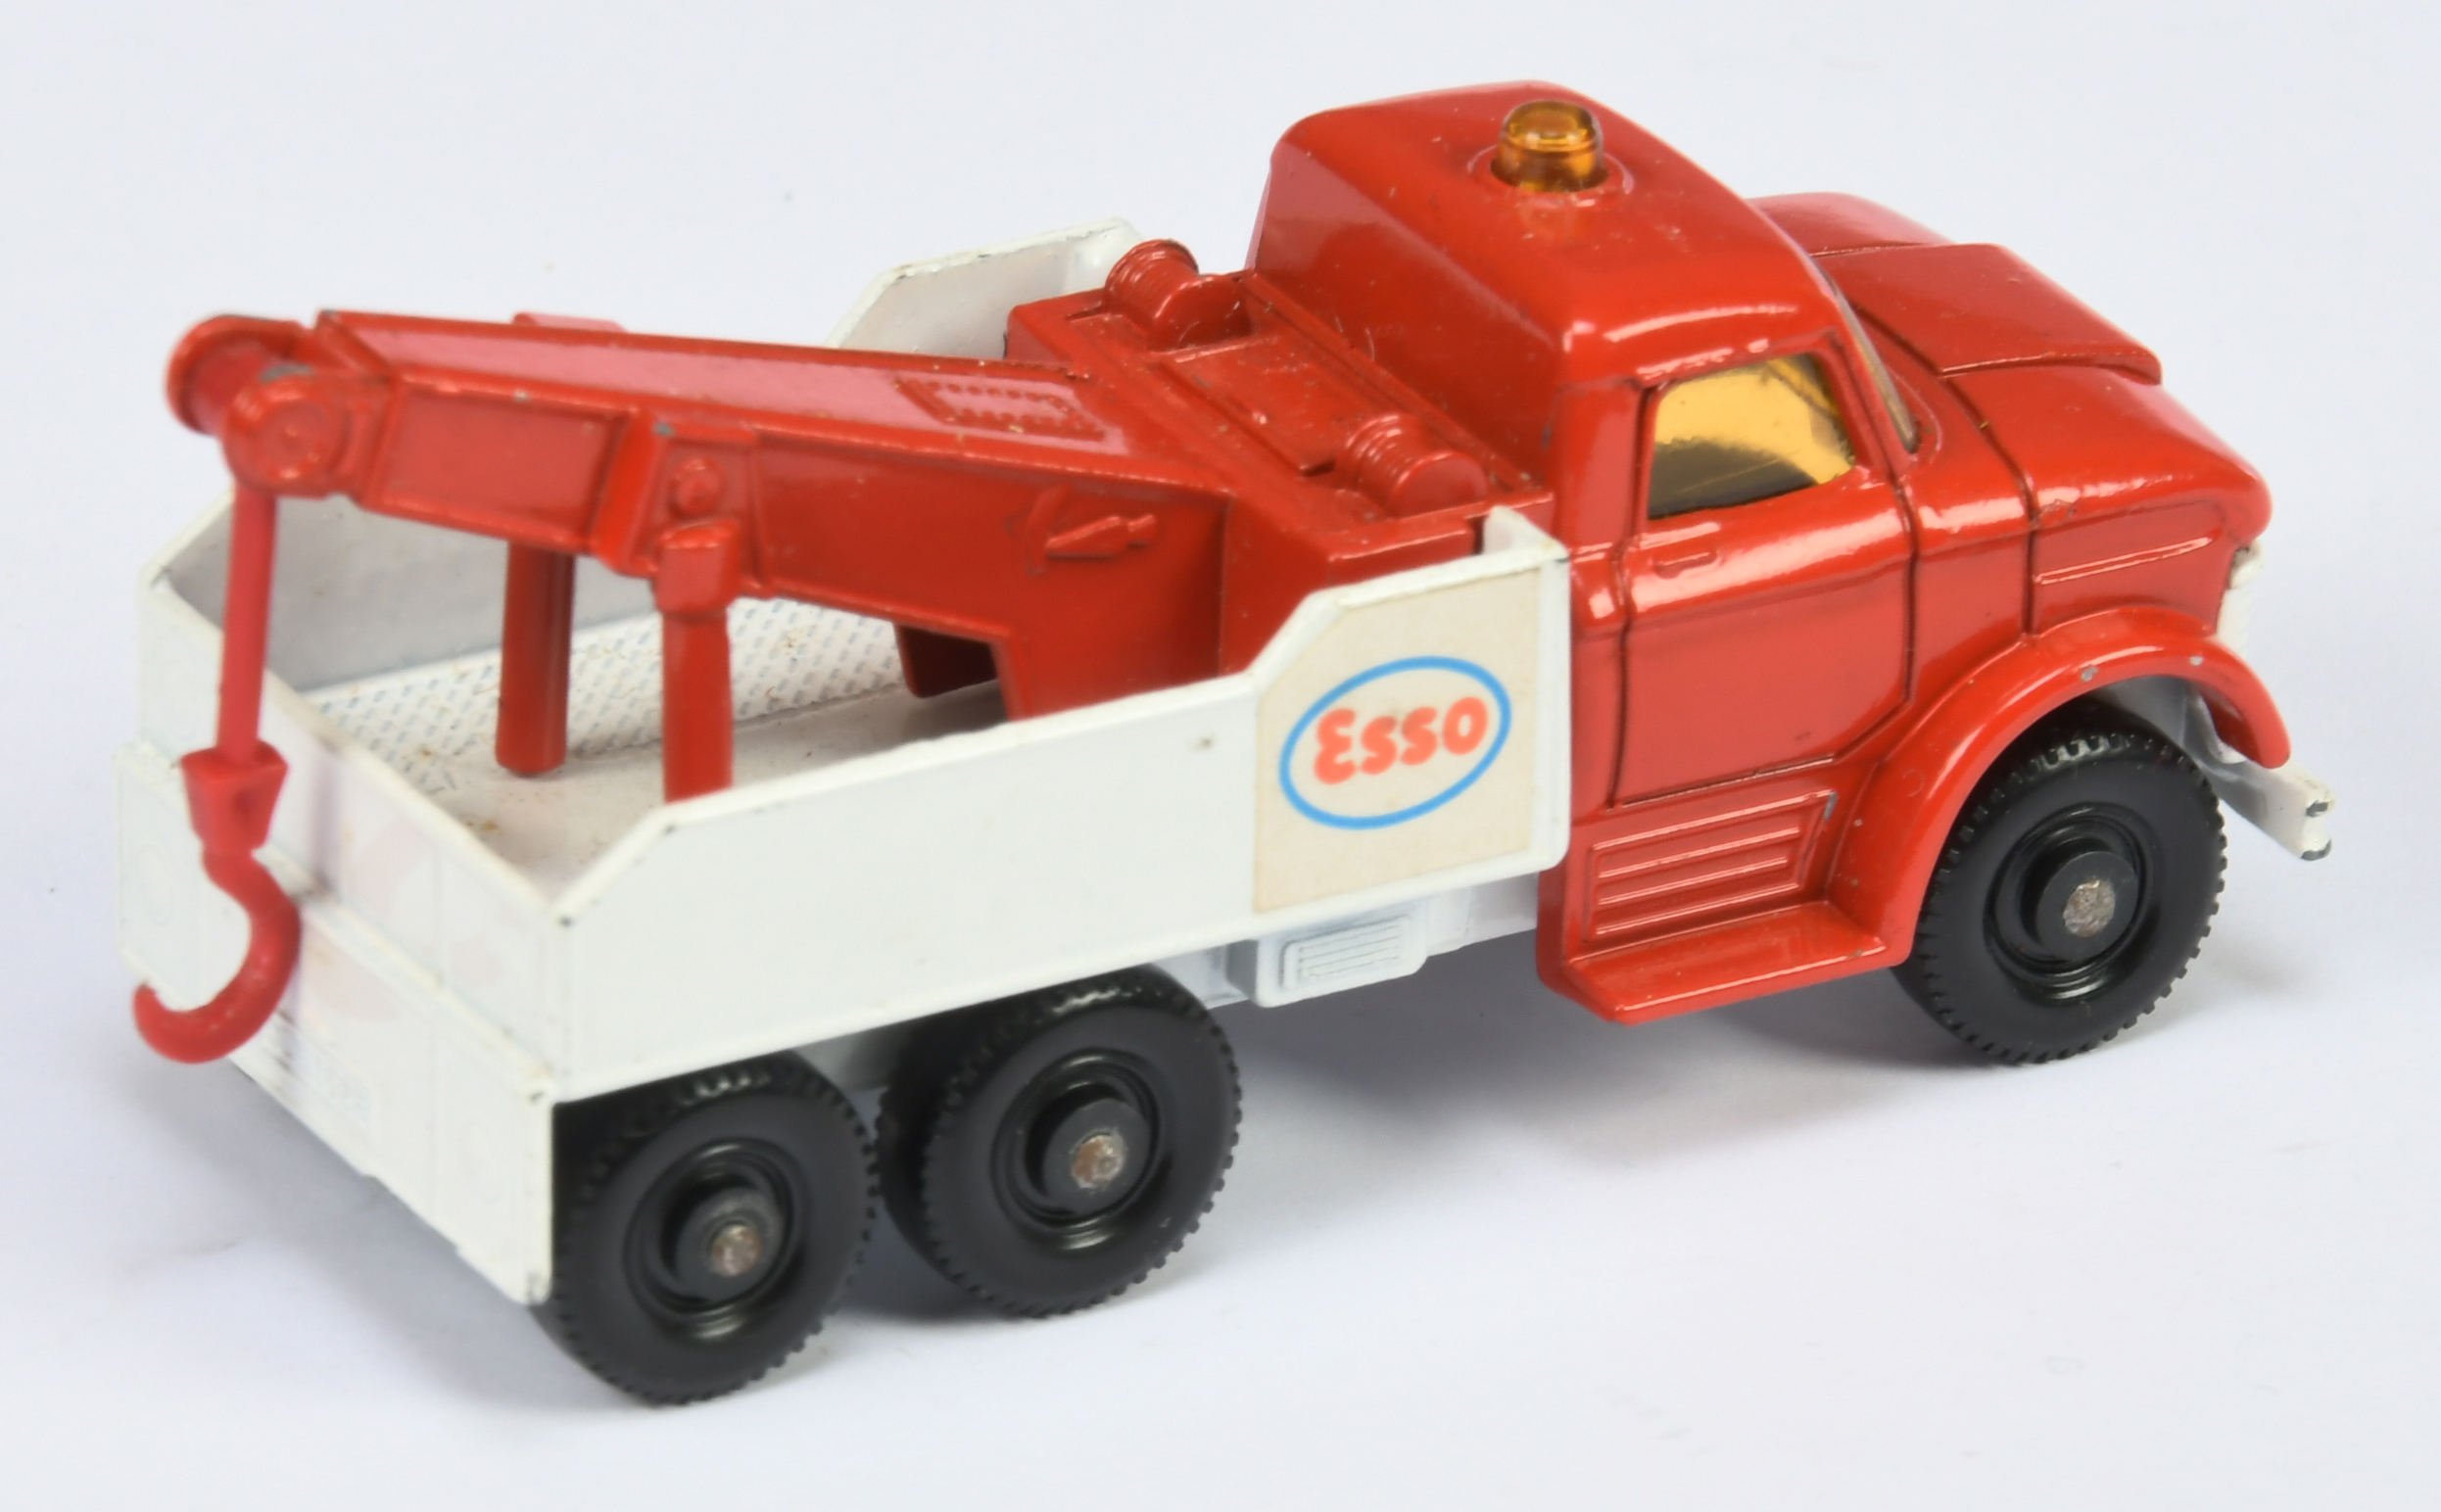 Matchbox Regular Wheels 71c Ford Heavy Wreck Truck "Esso" - red cab, jib and plastic hook, white ... - Image 2 of 2